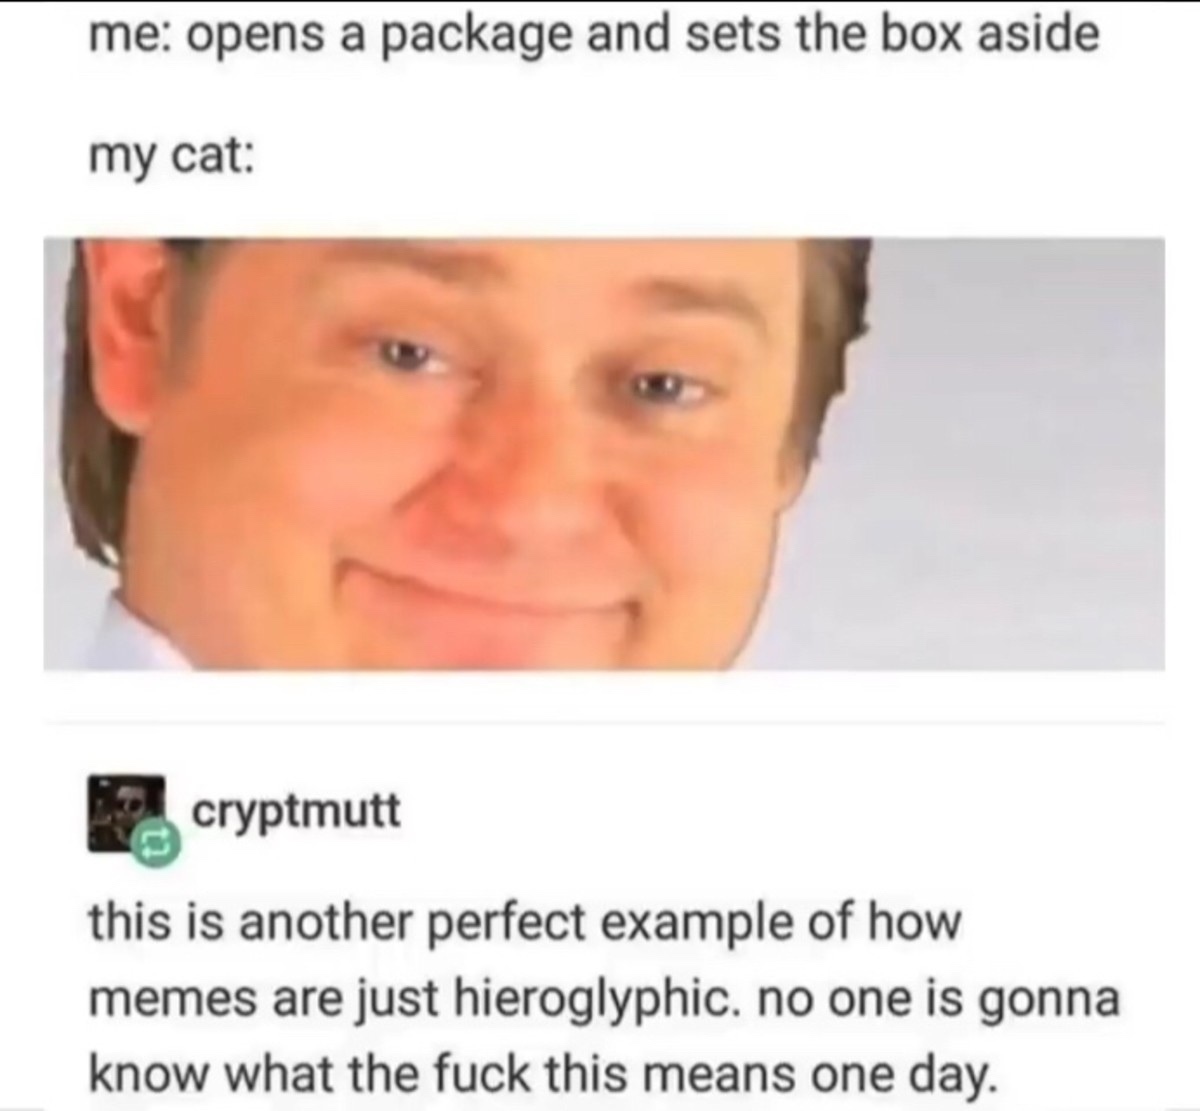 minecraft memes for kids - me opens a package and sets the box aside my cat cryptmutt this is another perfect example of how memes are just hieroglyphic. no one is gonna know what the fuck this means one day.